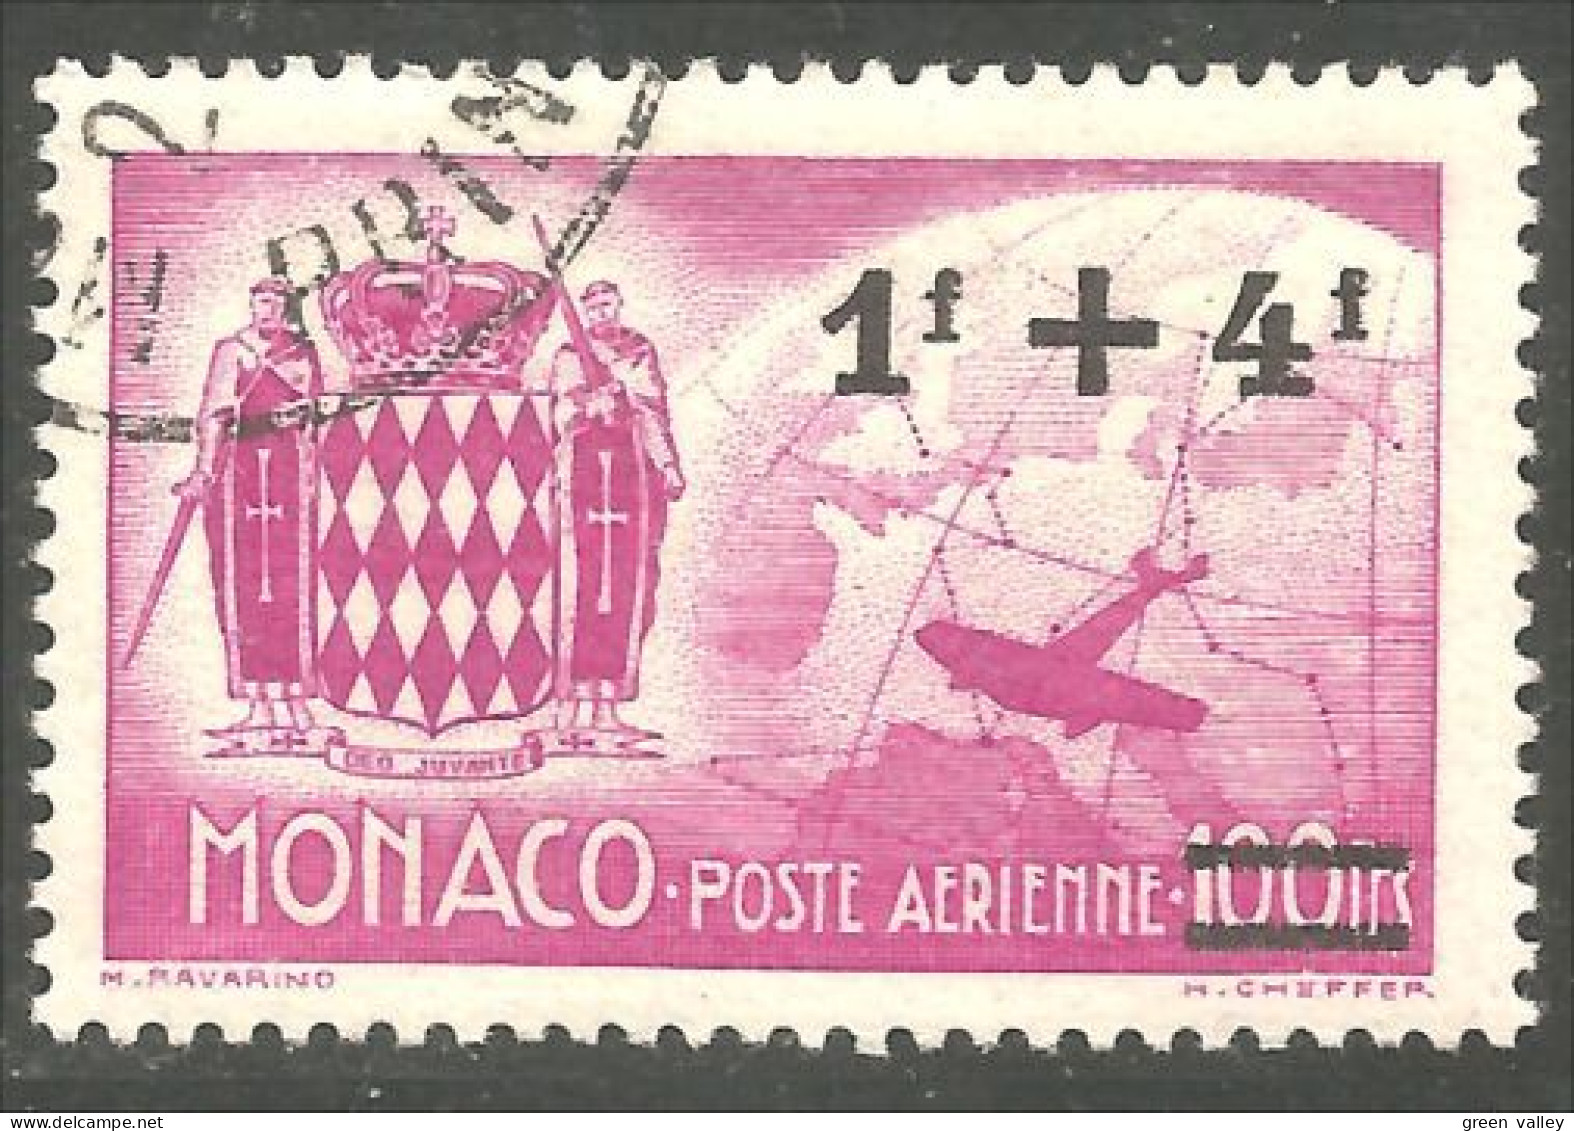 630x Monaco Armoiries Coat Of Arms Surcharge (MON-585) - Timbres